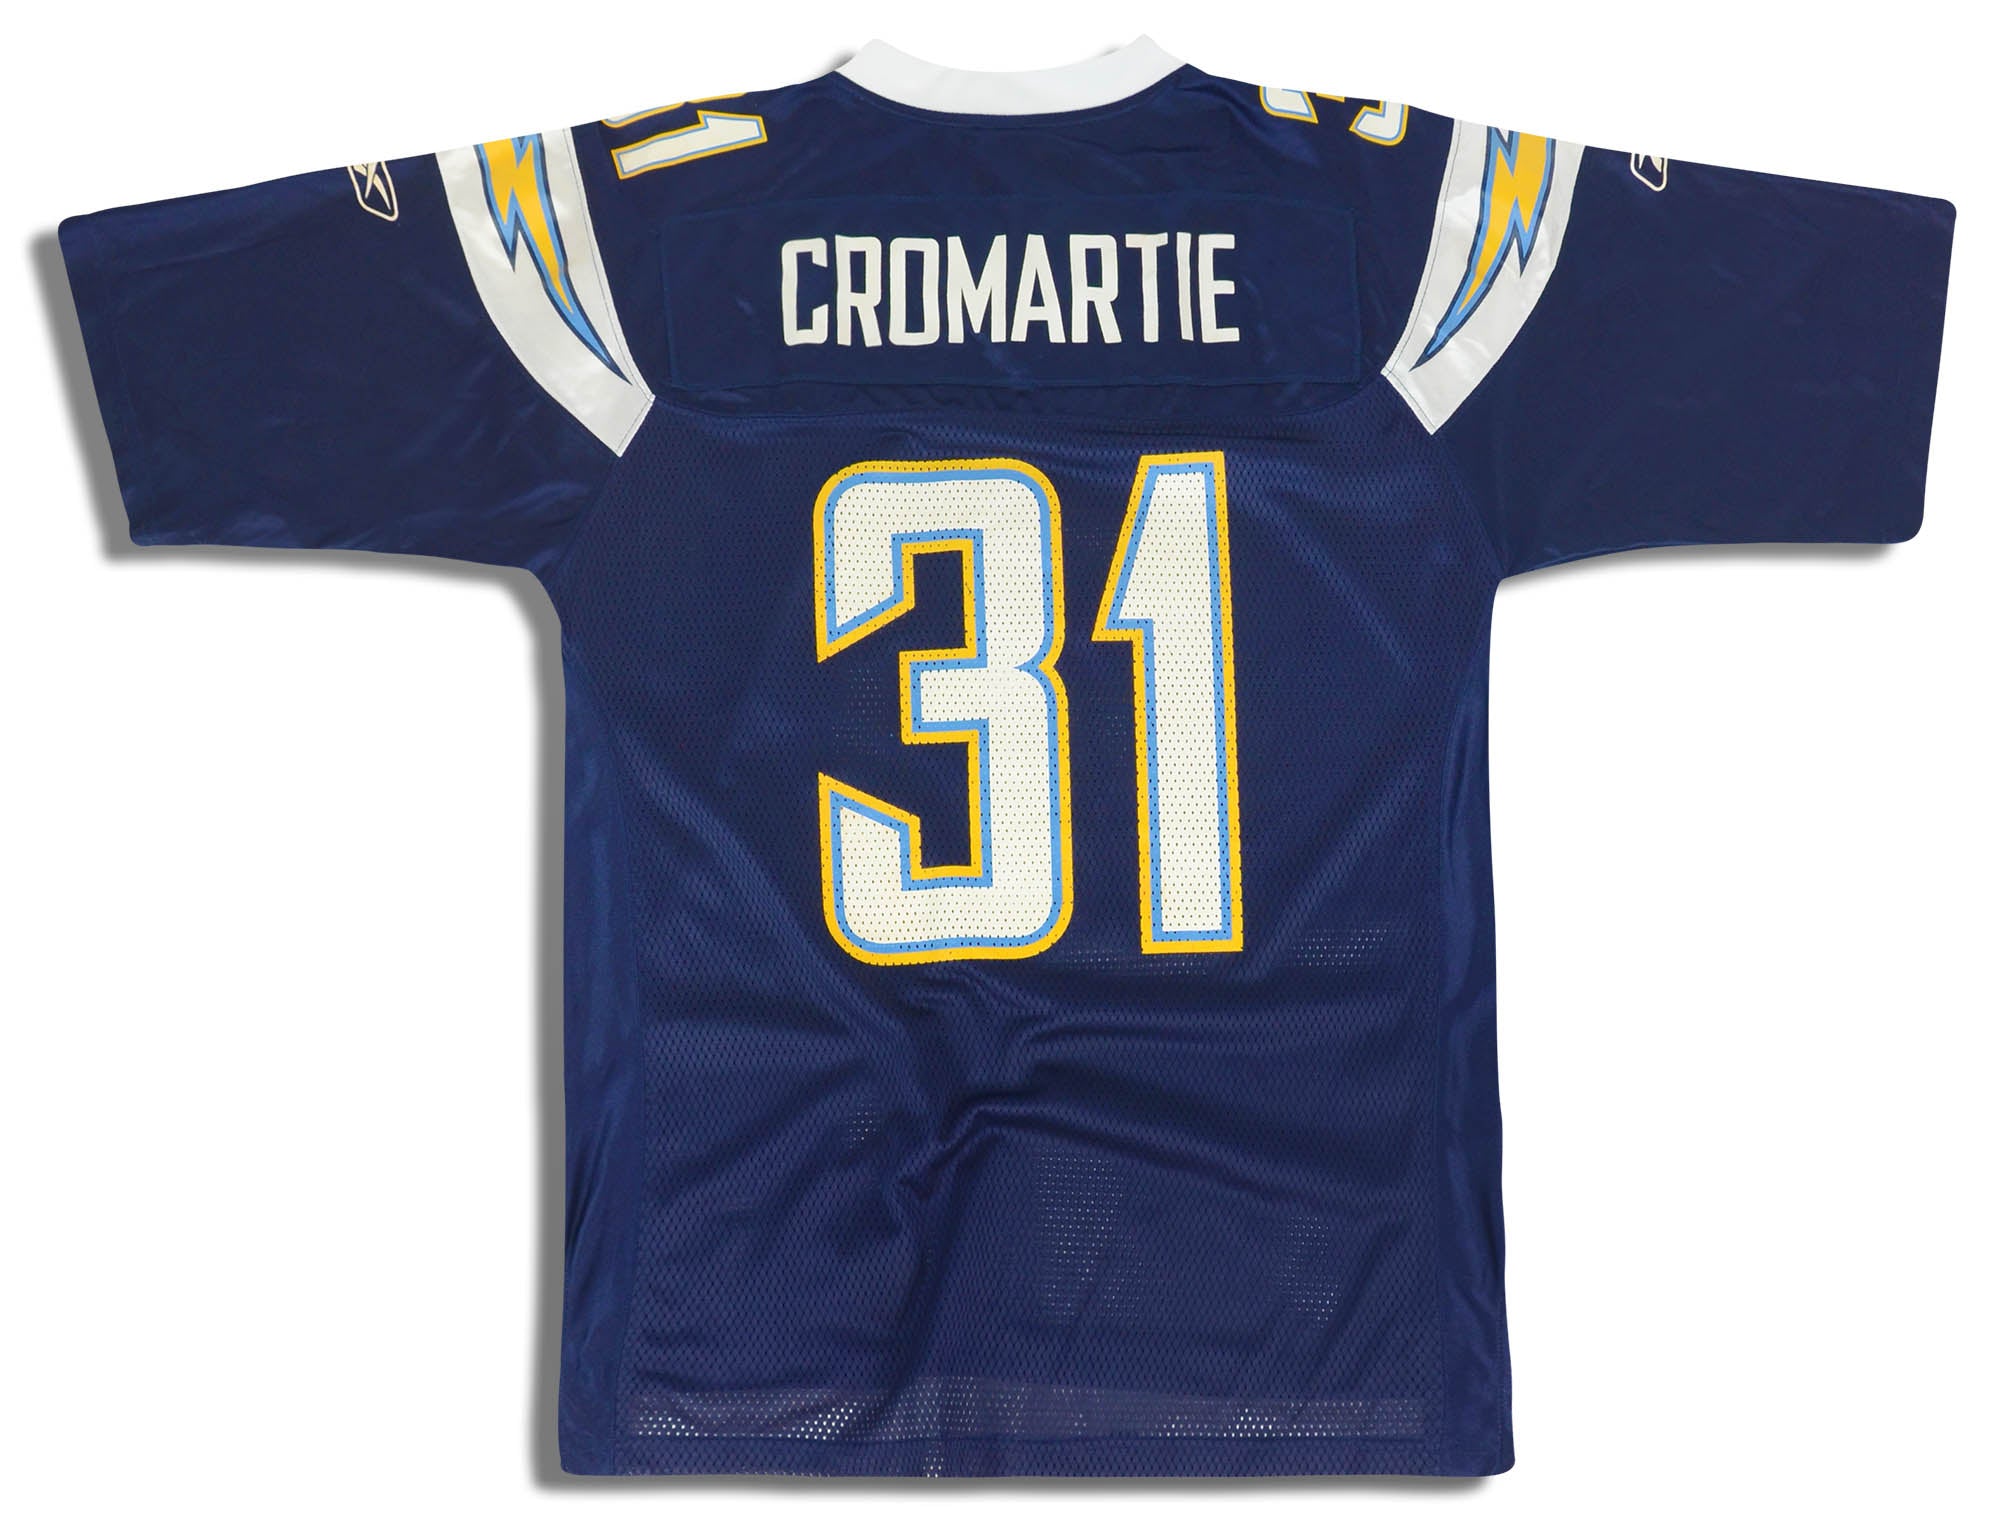 2007 SAN DIEGO CHARGERS CROMARTIE #31 REEBOK ON FIELD JERSEY (HOME) M -  Classic American Sports